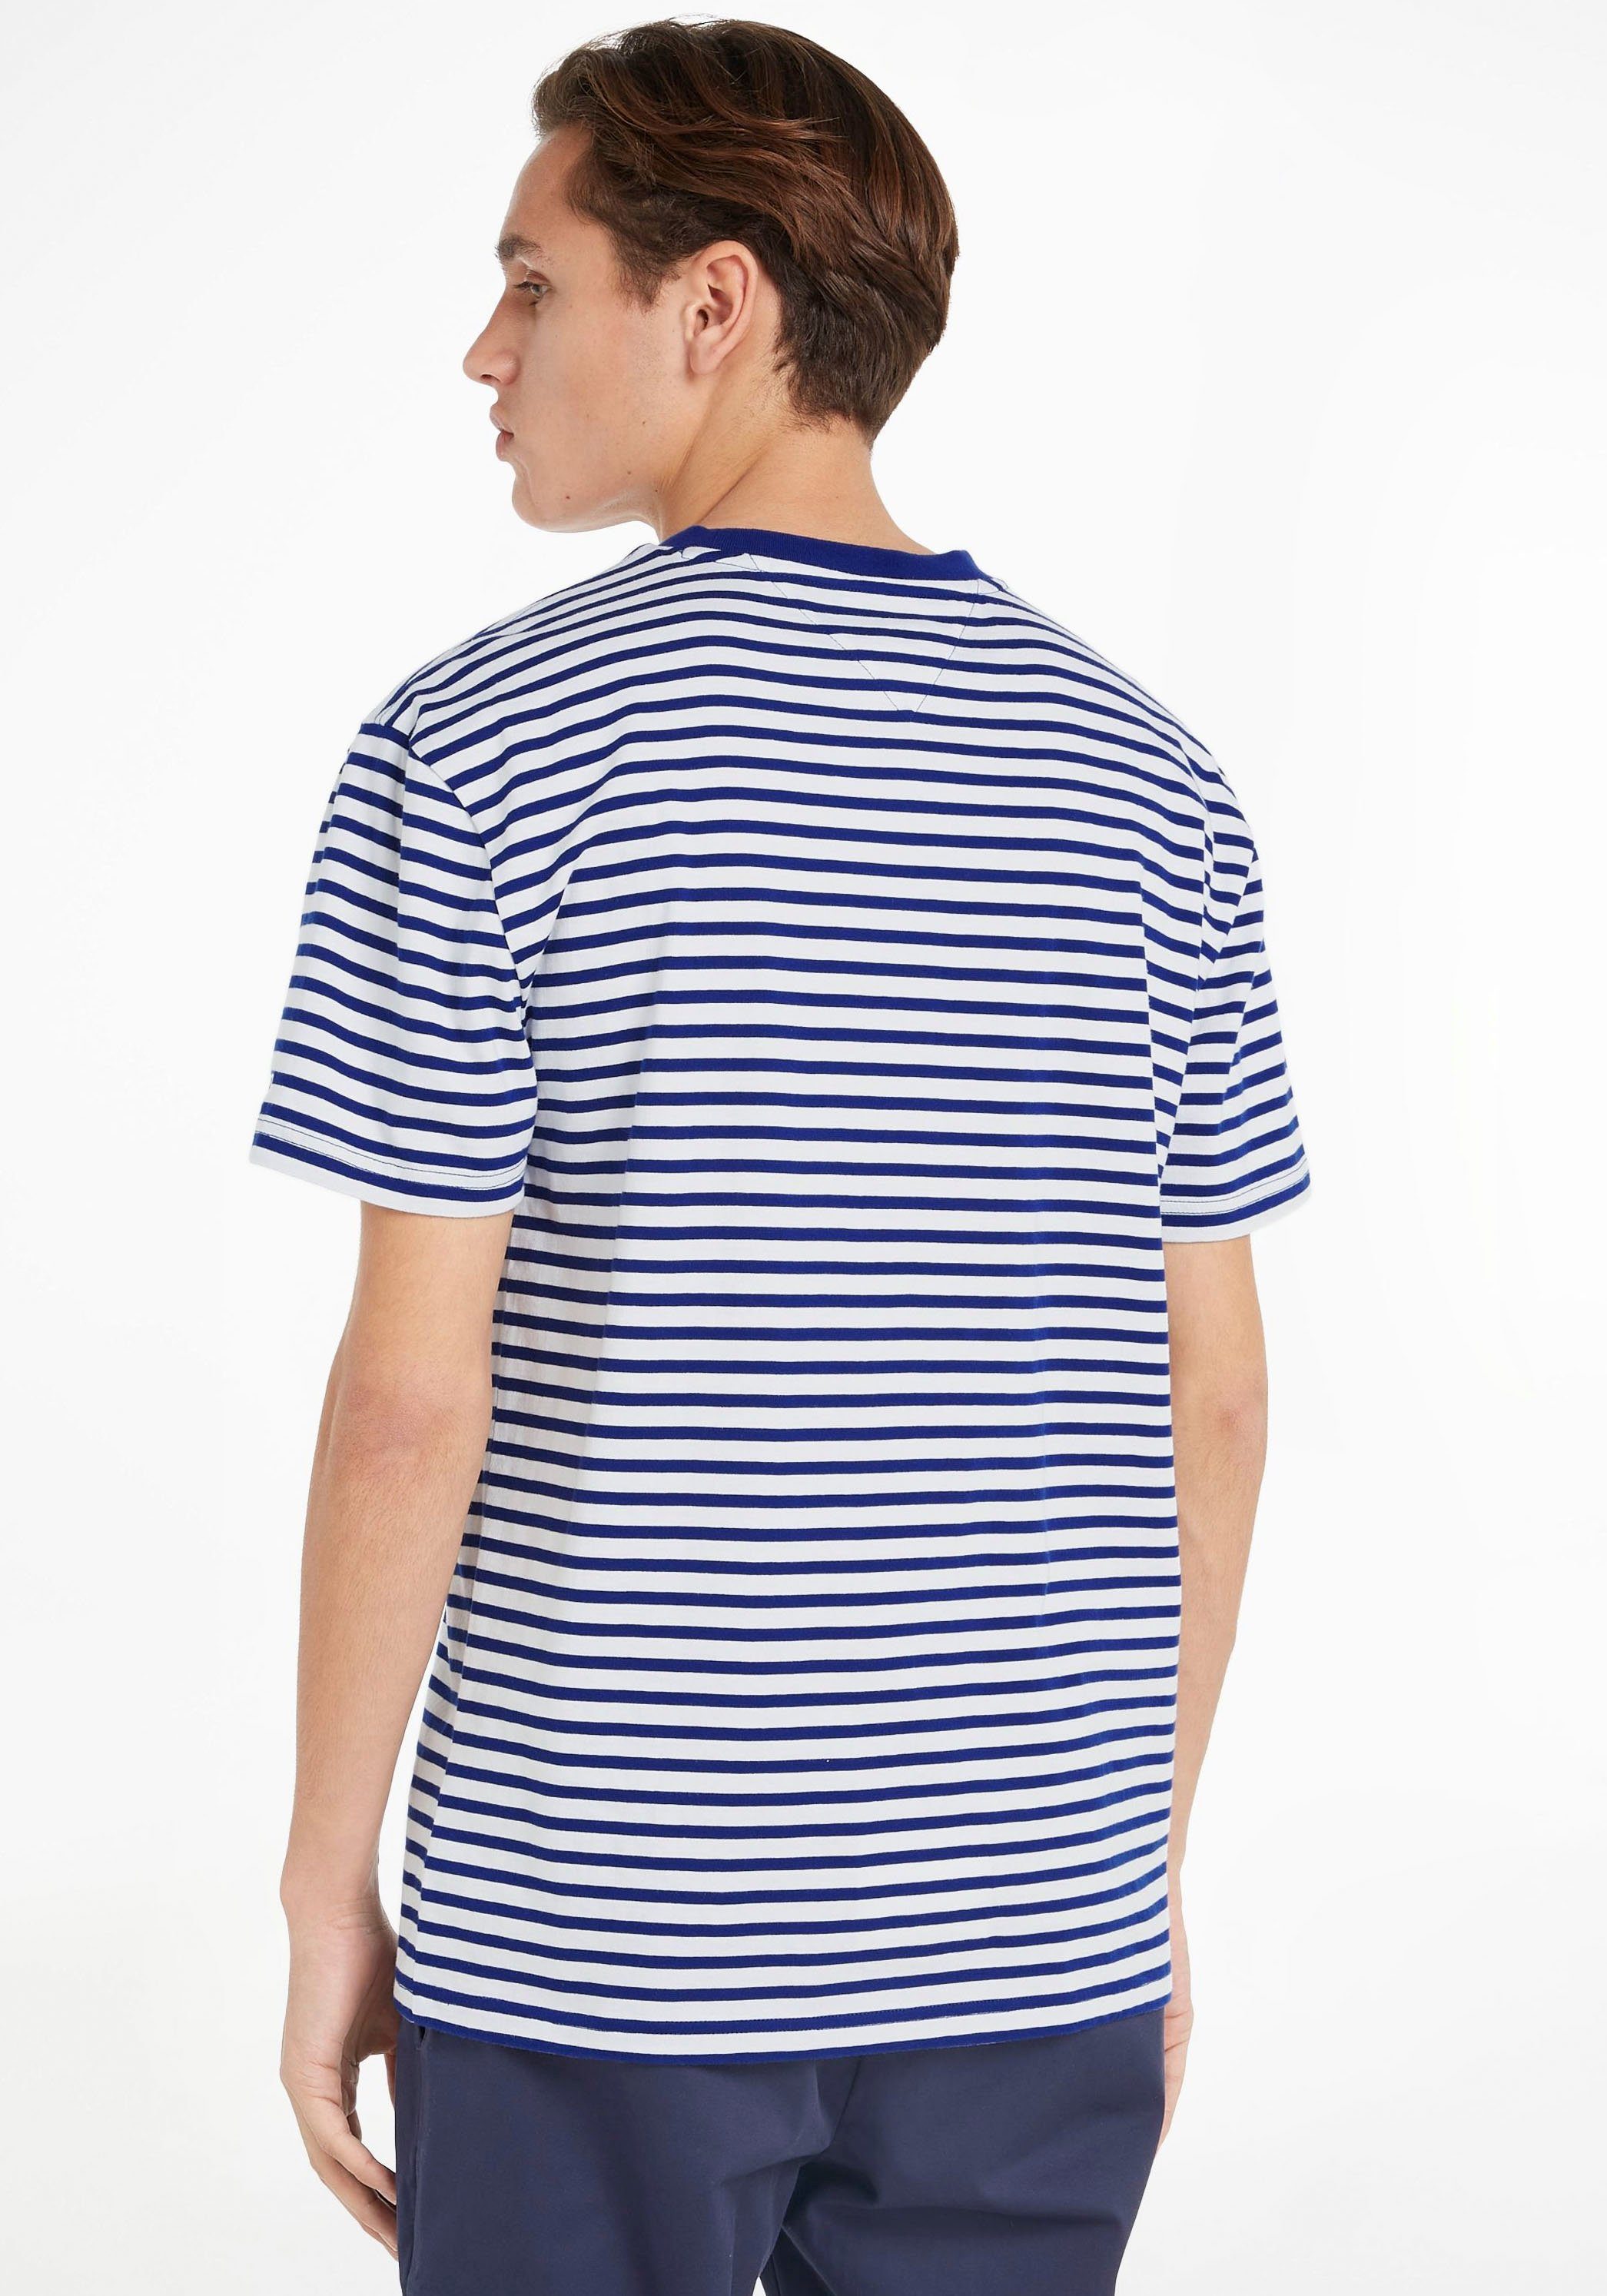 TEE / STRIPE T-Shirt GRAPHIC Voyage TJM Jeans Multi Tommy CLSC Navy